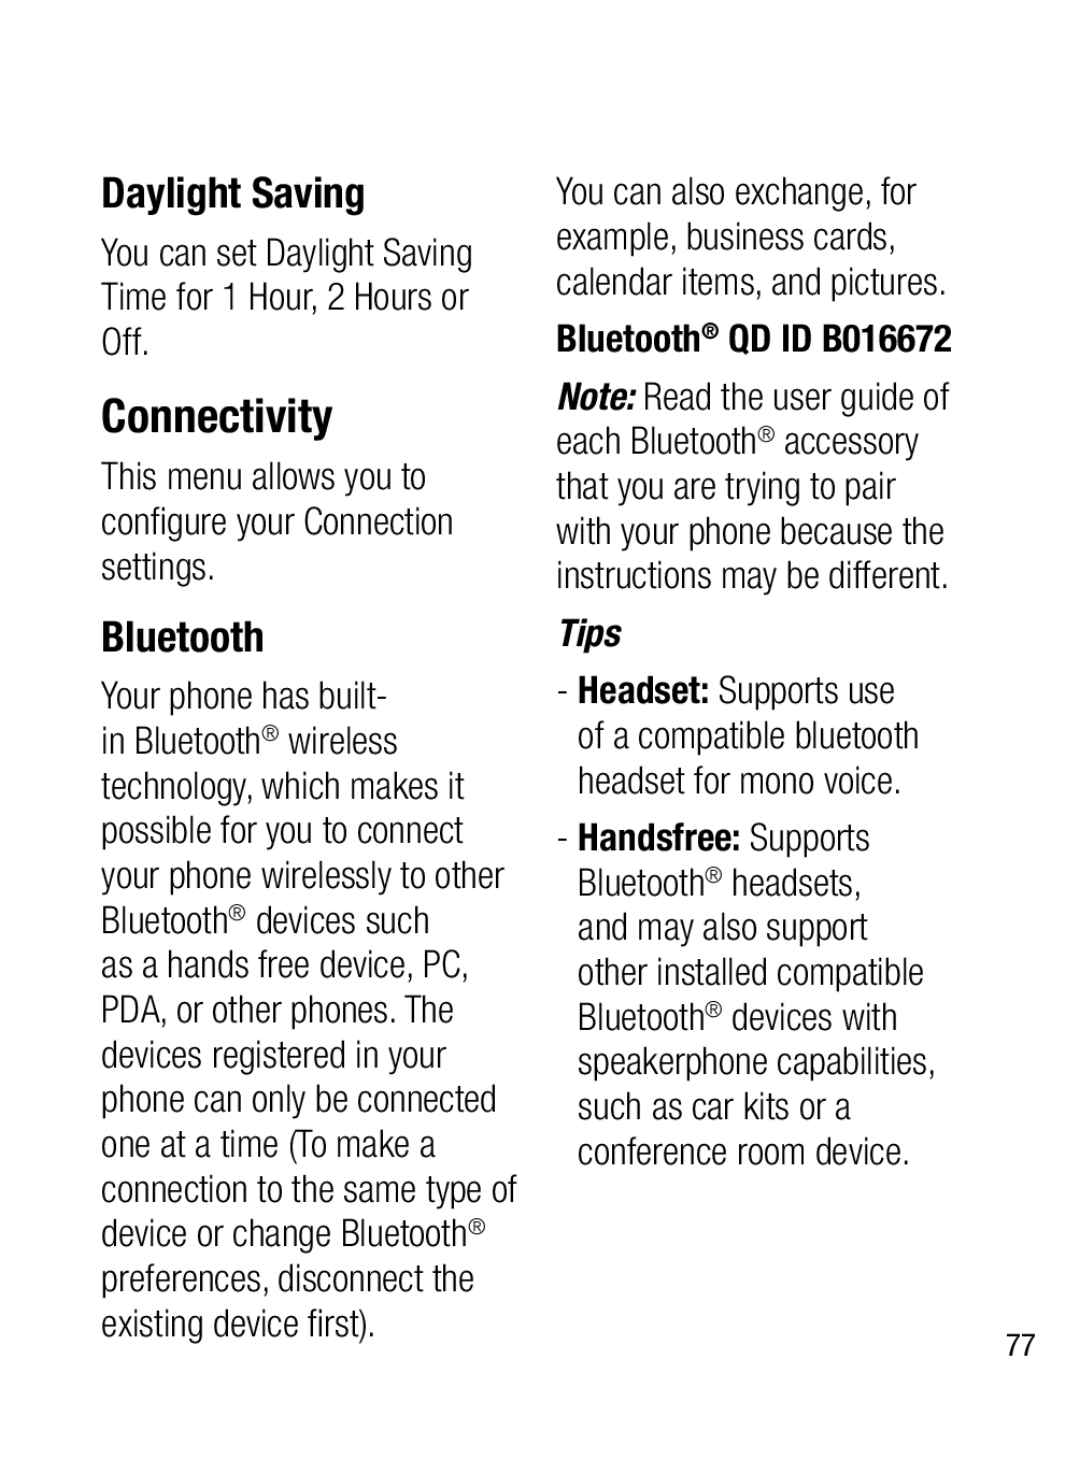 LG Electronics A133CH Connectivity, Daylight Saving, Bluetooth, This menu allows you to conﬁ gure your Connection settings 